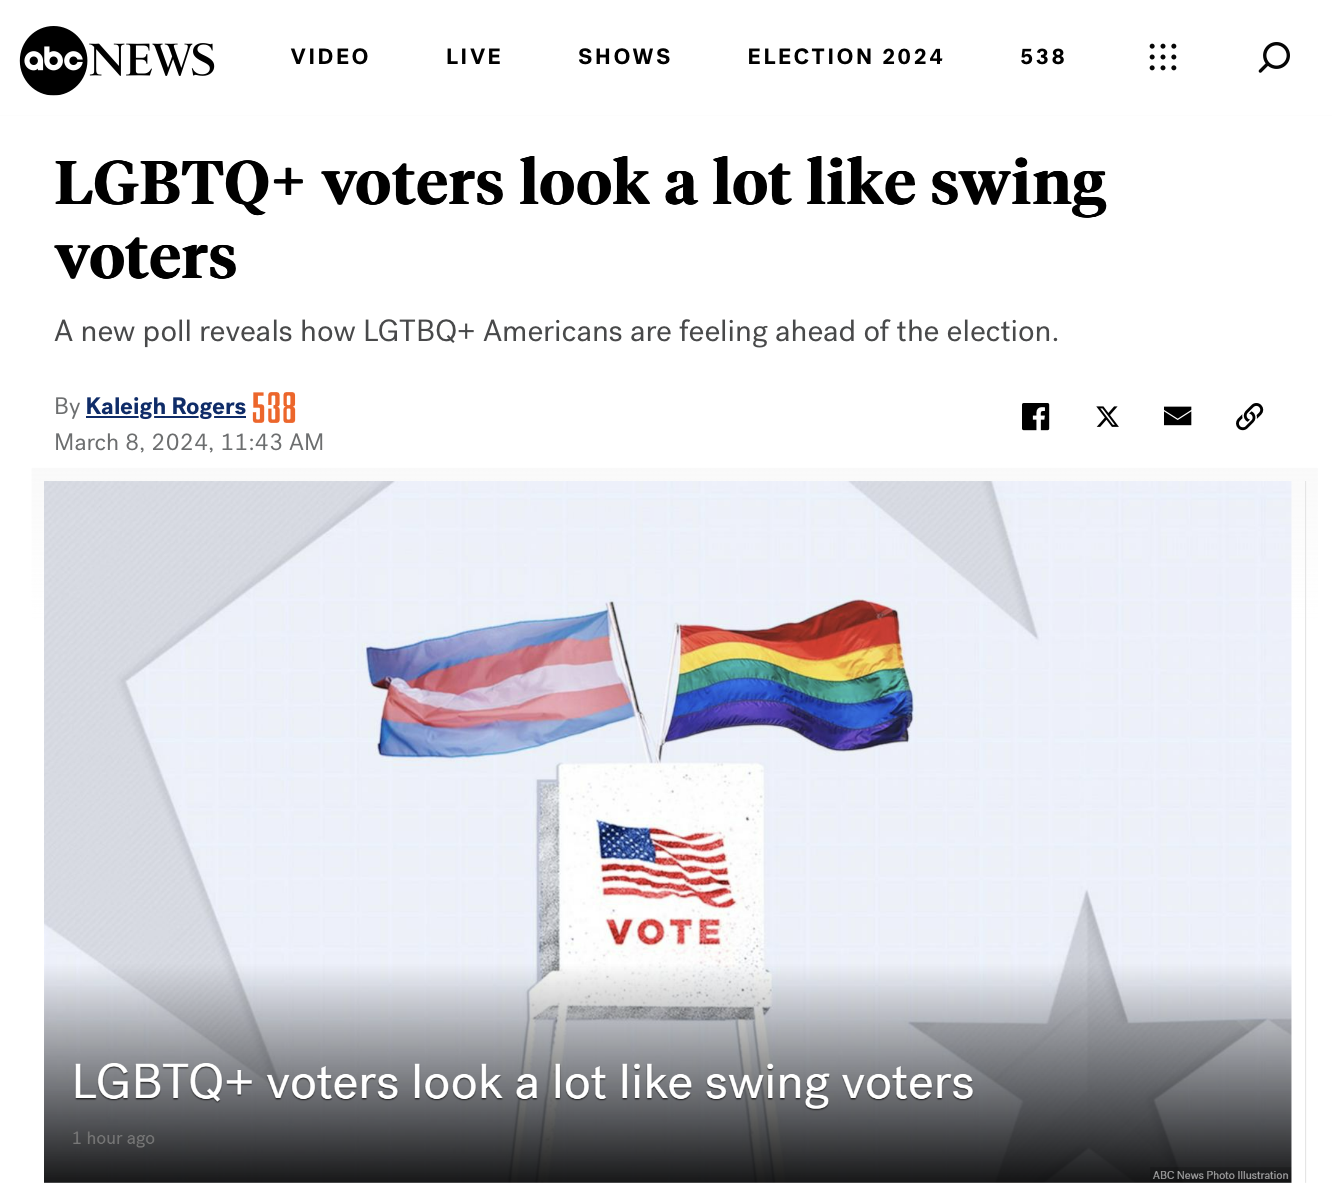 ABC News 538 Independent Center Exclusive on how the LGBTQ+ swing vote will influence the 2024 election